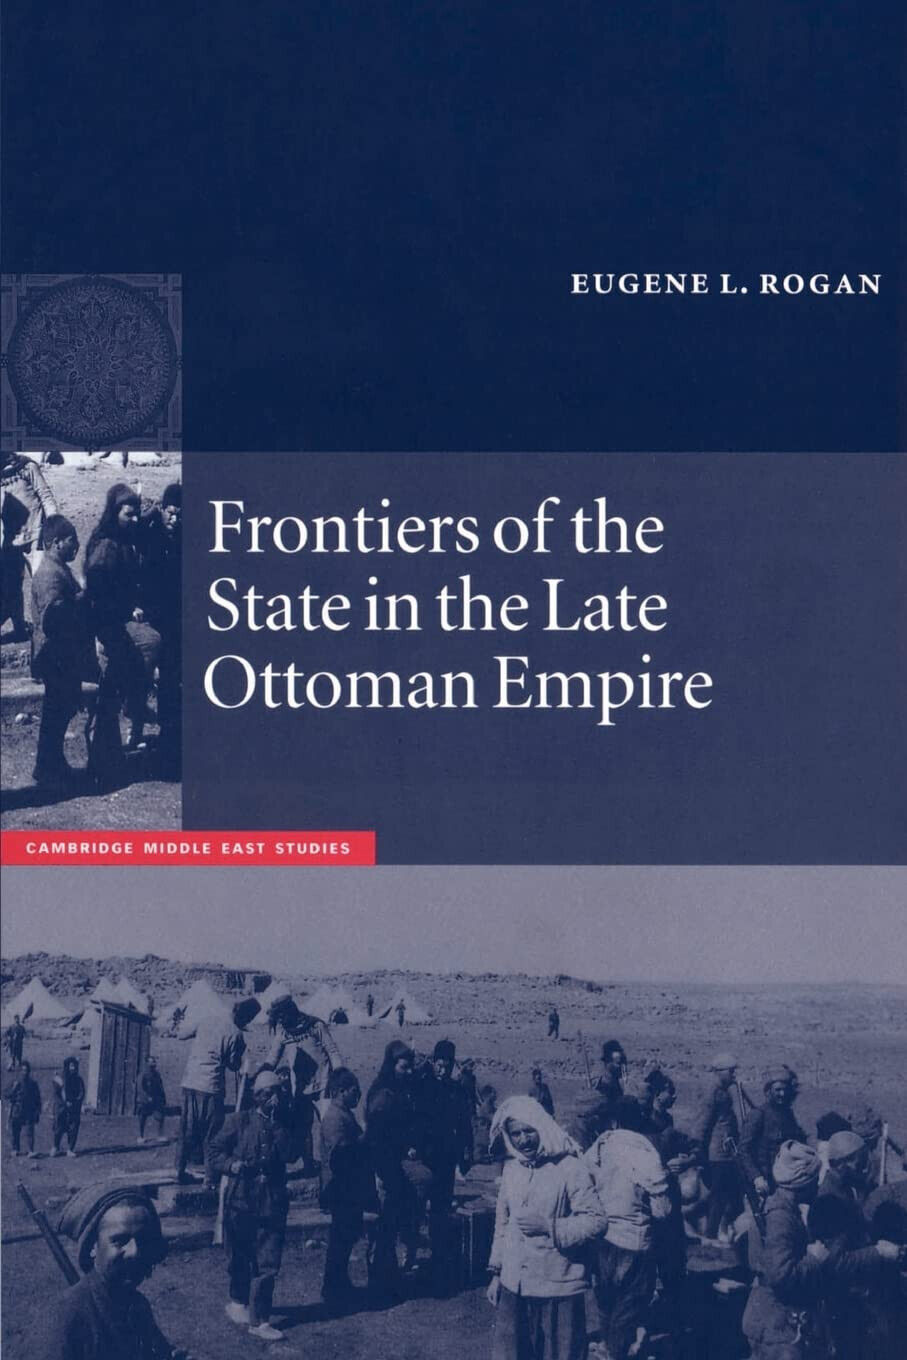 Frontiers of the State in the Late Ottoman Empire - Eugene L. Rogan - 1998